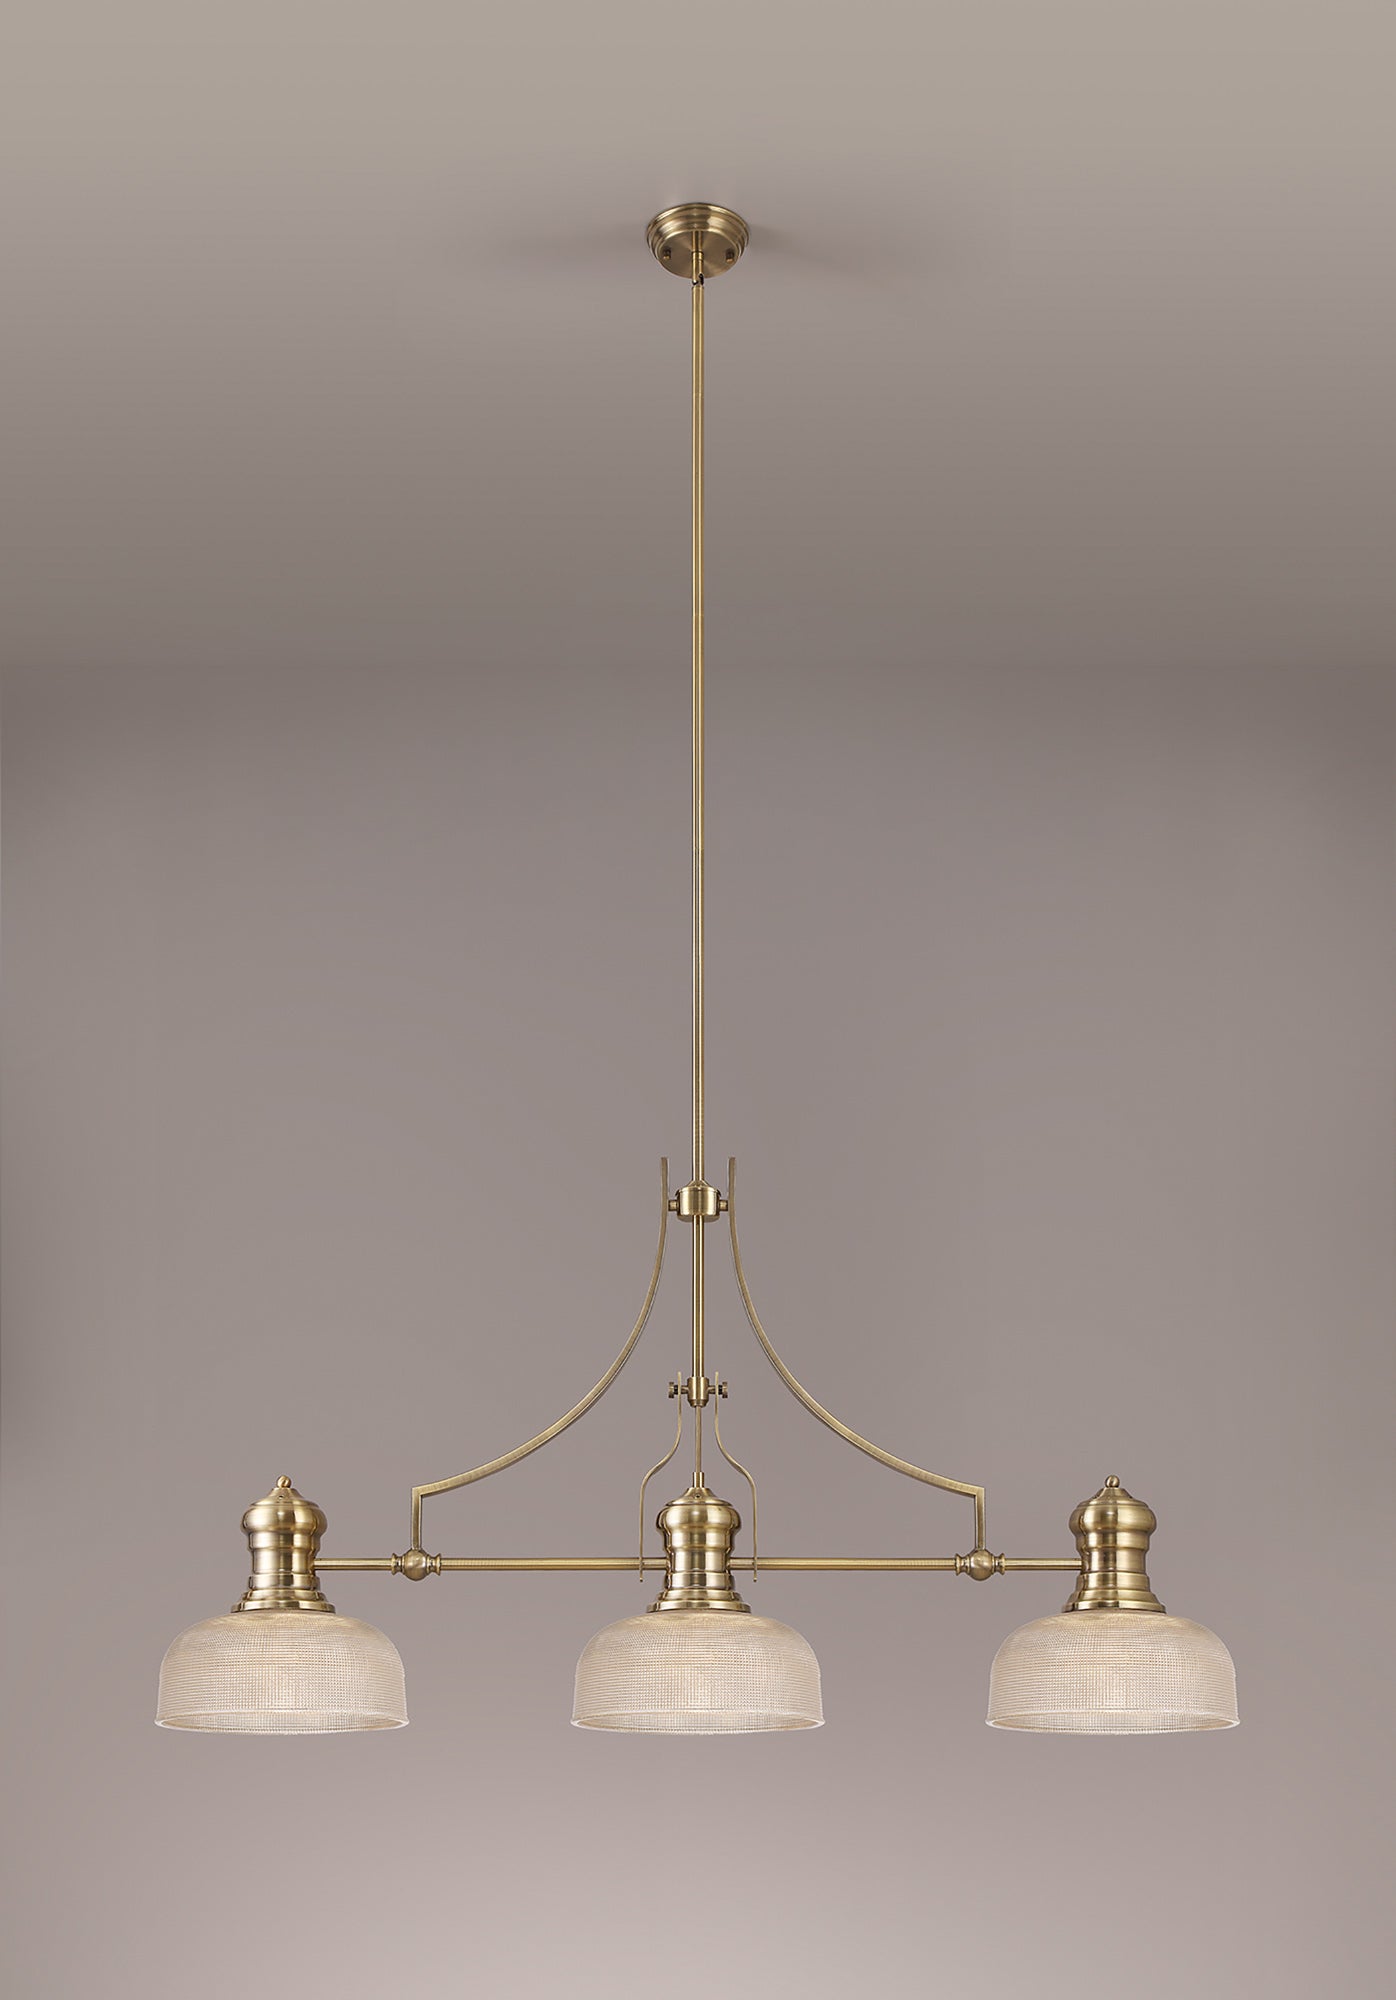 Docker 3 Light Linear Pendant E27 With 26.5cm Prismatic Glass Shade, Antique Brass, Clear